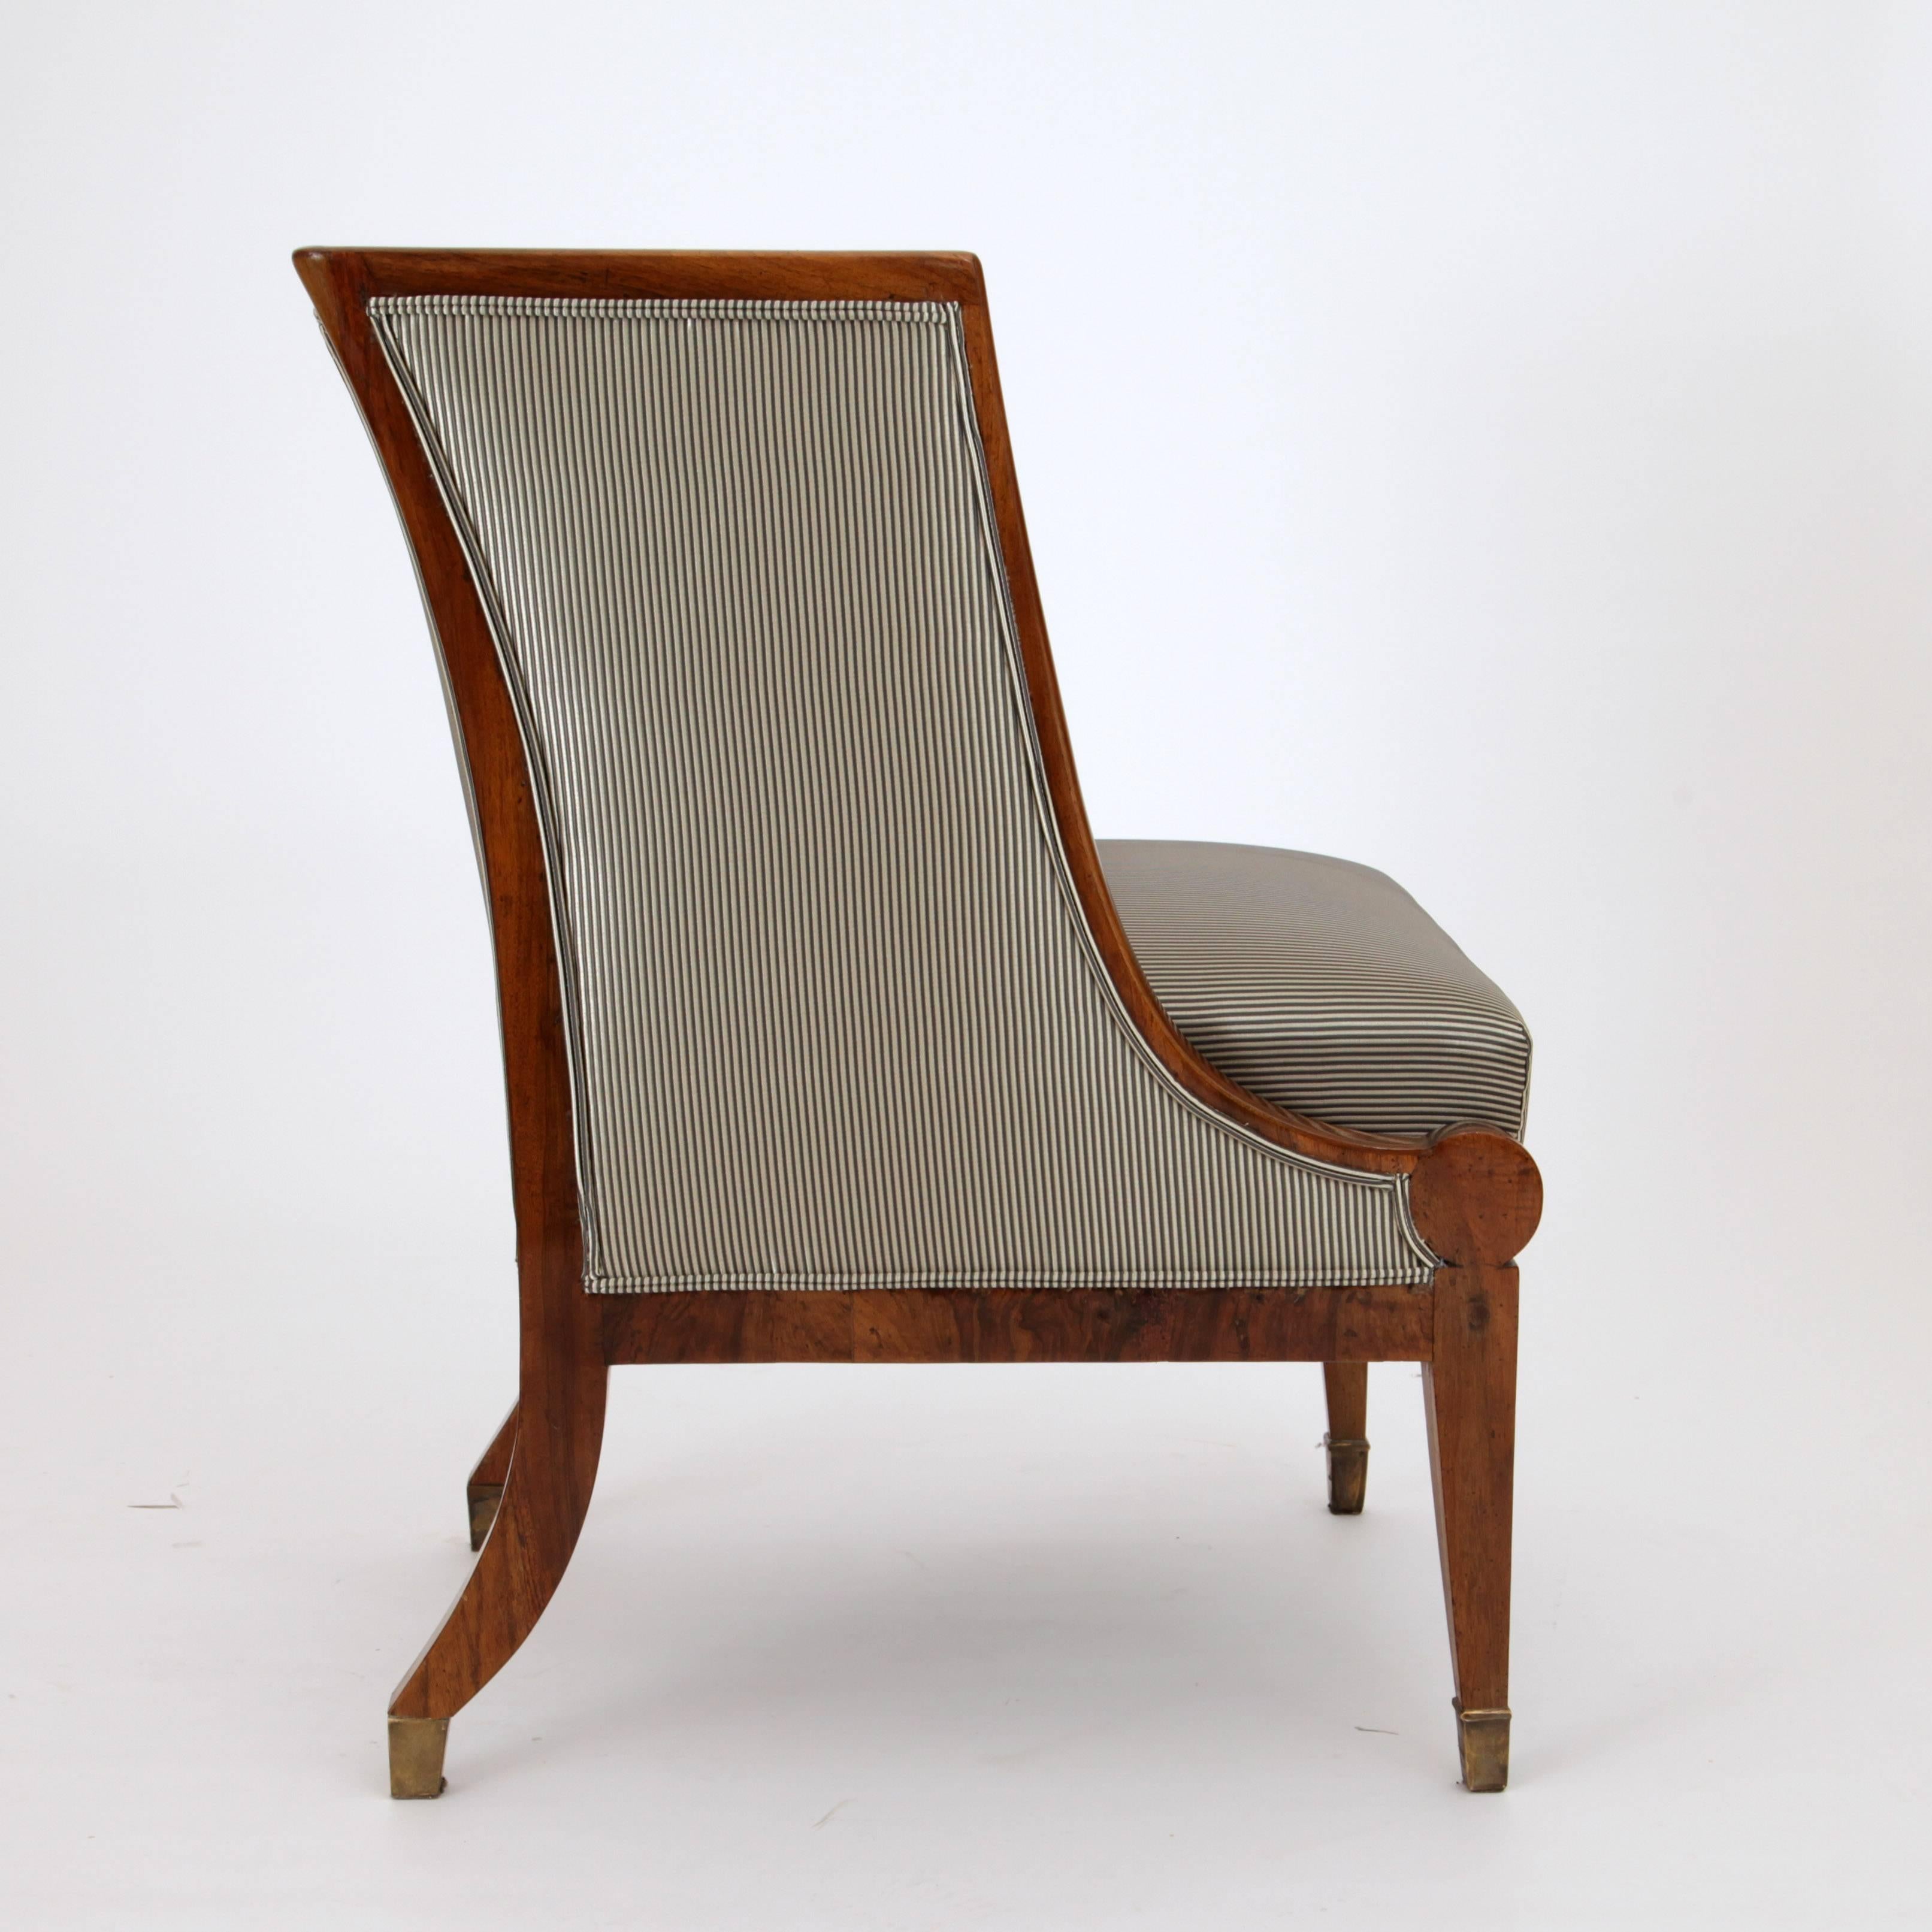 Biedermeier bergère chair on tapered legs with brass sabots. The rear legs are slightly bent. The backrest has a straight edge and is in a right angle to the C-shaped sides. The chair is newly upholstered in a very beautiful and high-quality fabric.